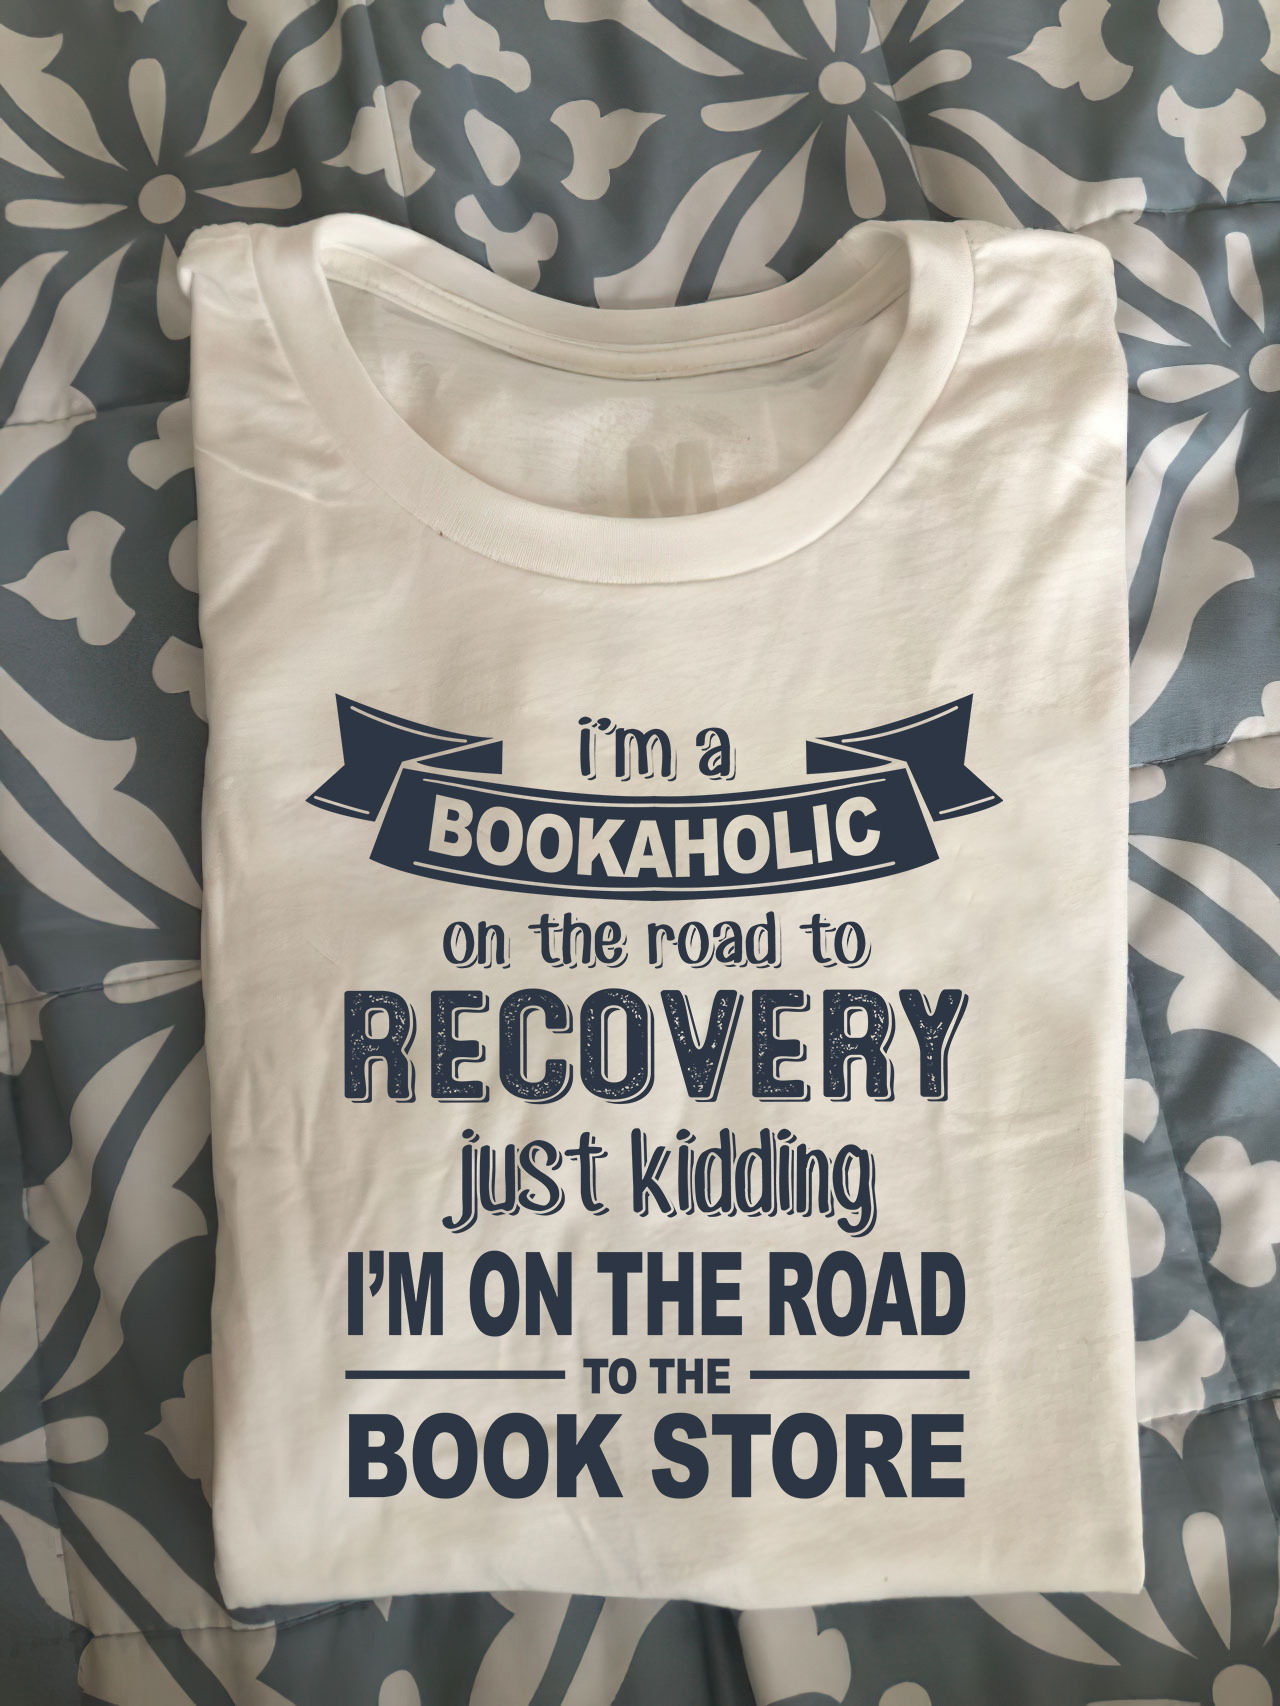 I'm a bookaholic on the road to recovery just kidding I'm on the road to the book store